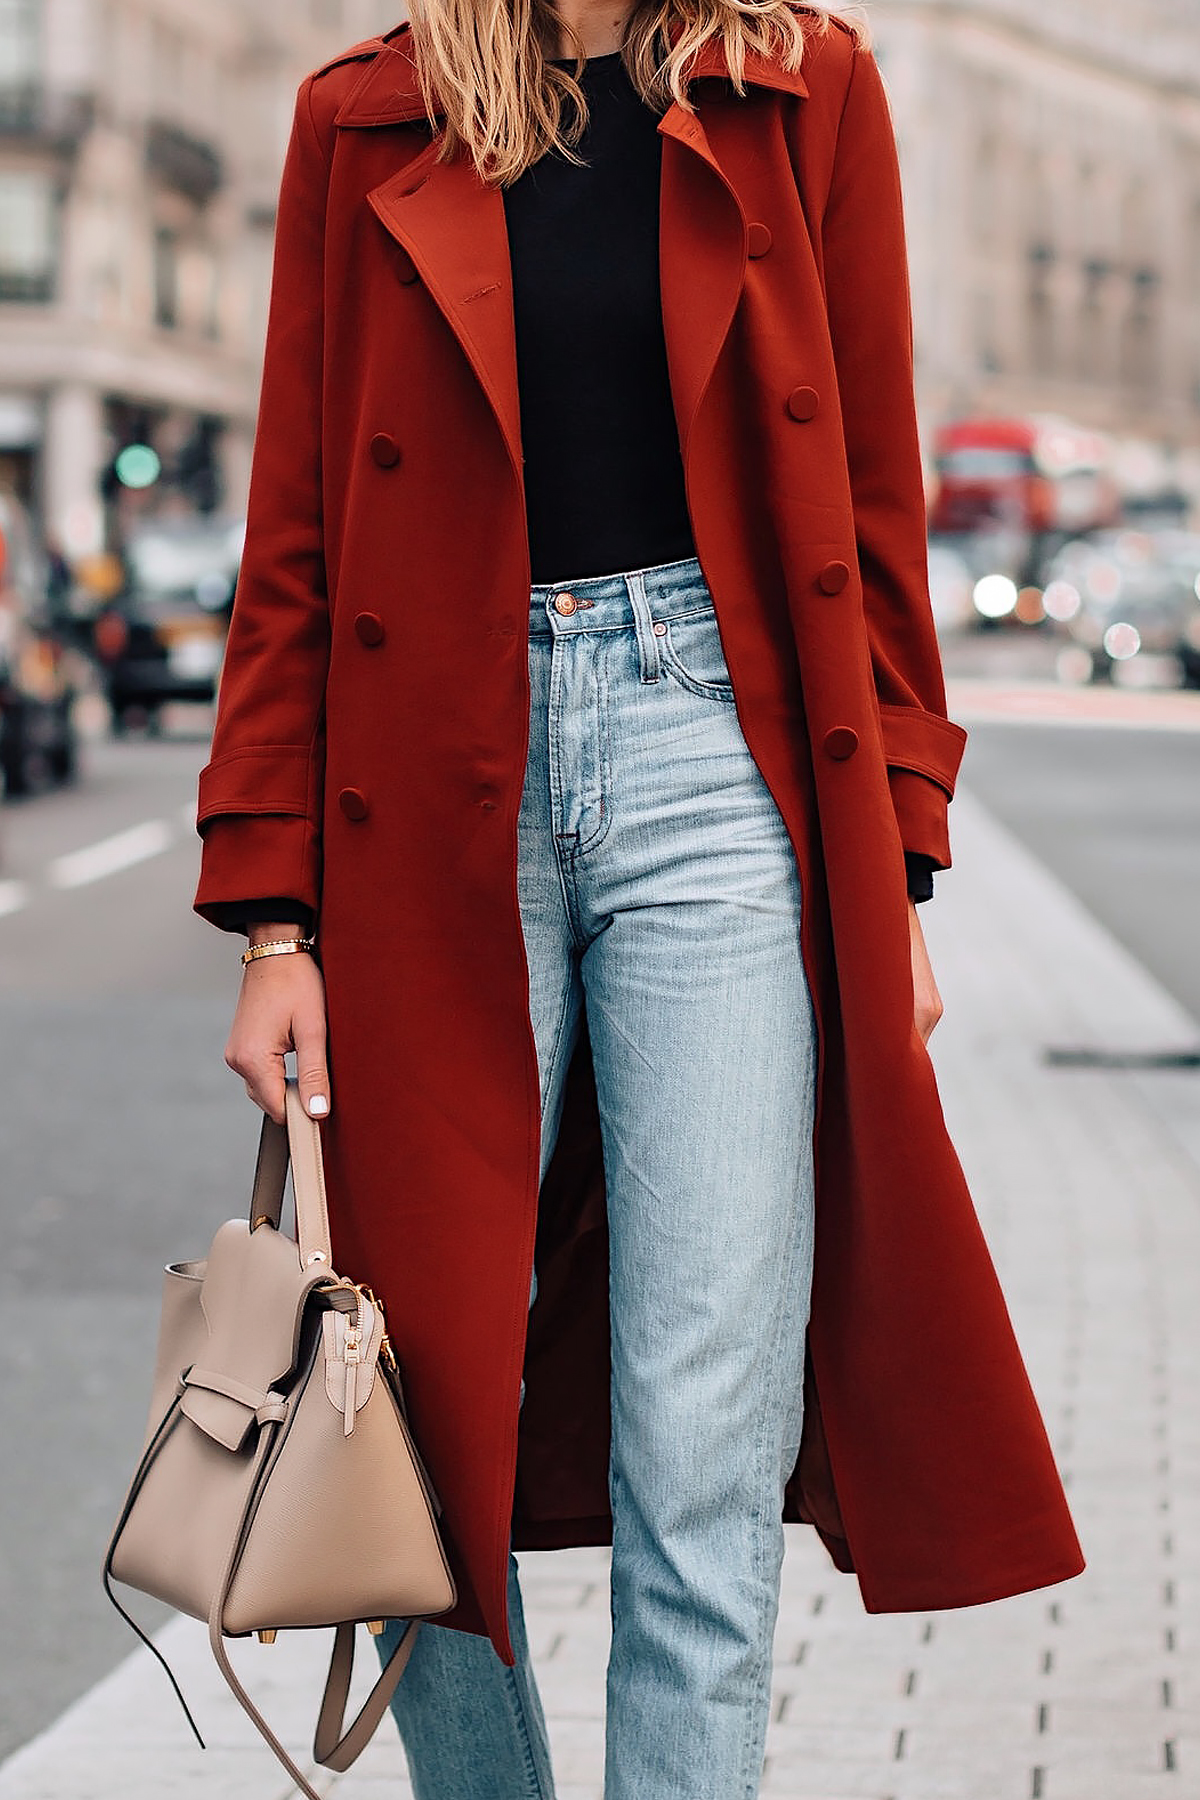 Woman Wearing Red Trench Coat Black Top Jeans Outfit Fashion Jackson San Diego Fashion Blogger London Street Style